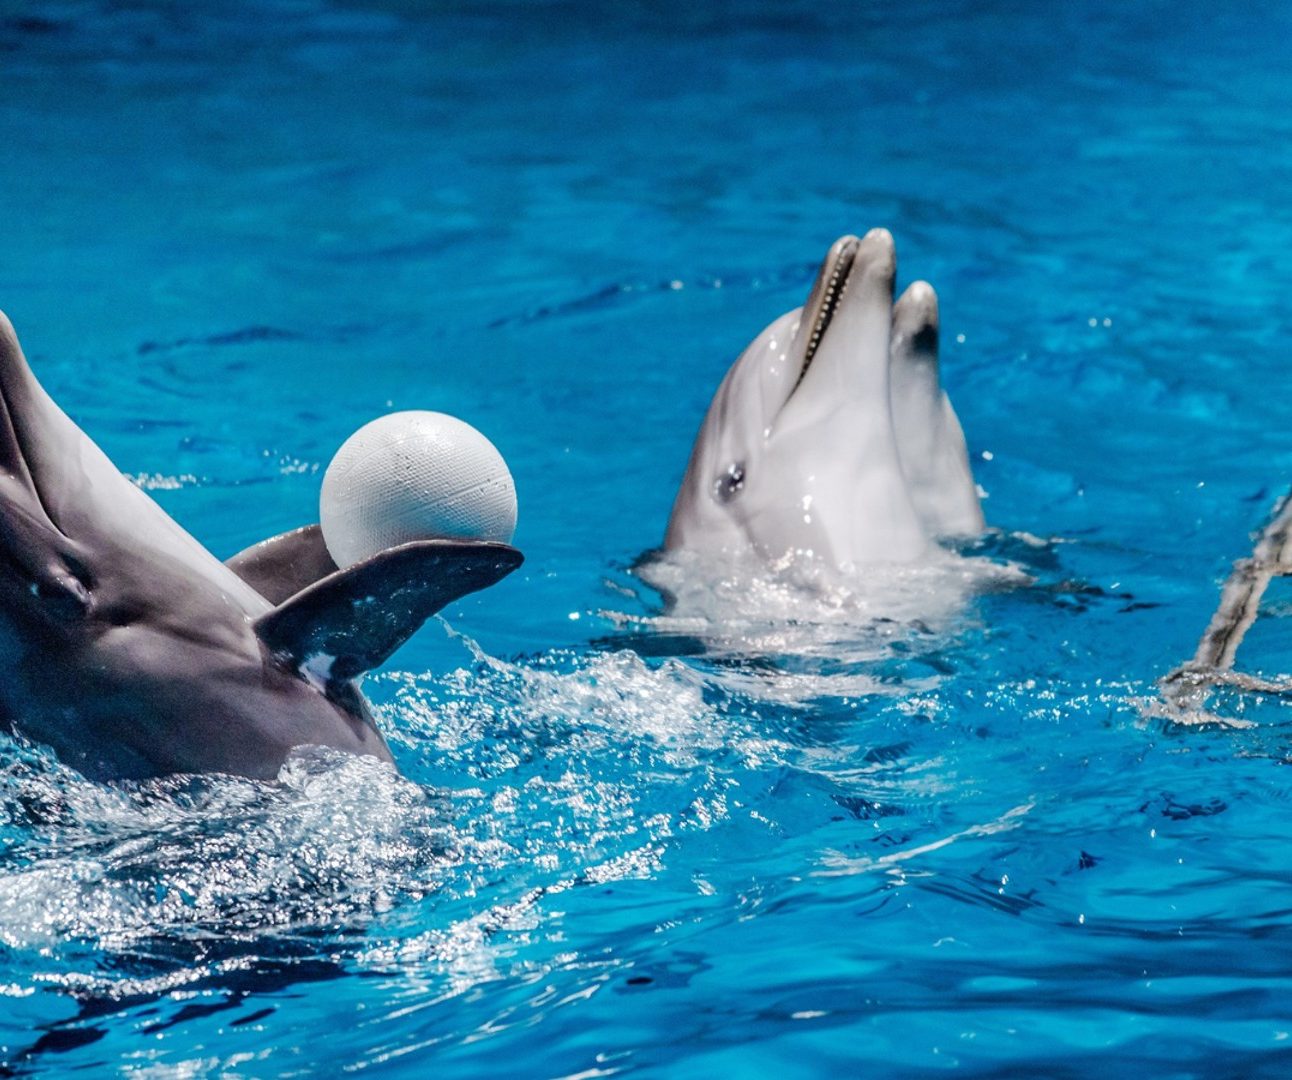 Two dolphins in a pool taking part in a show and playing with a ball